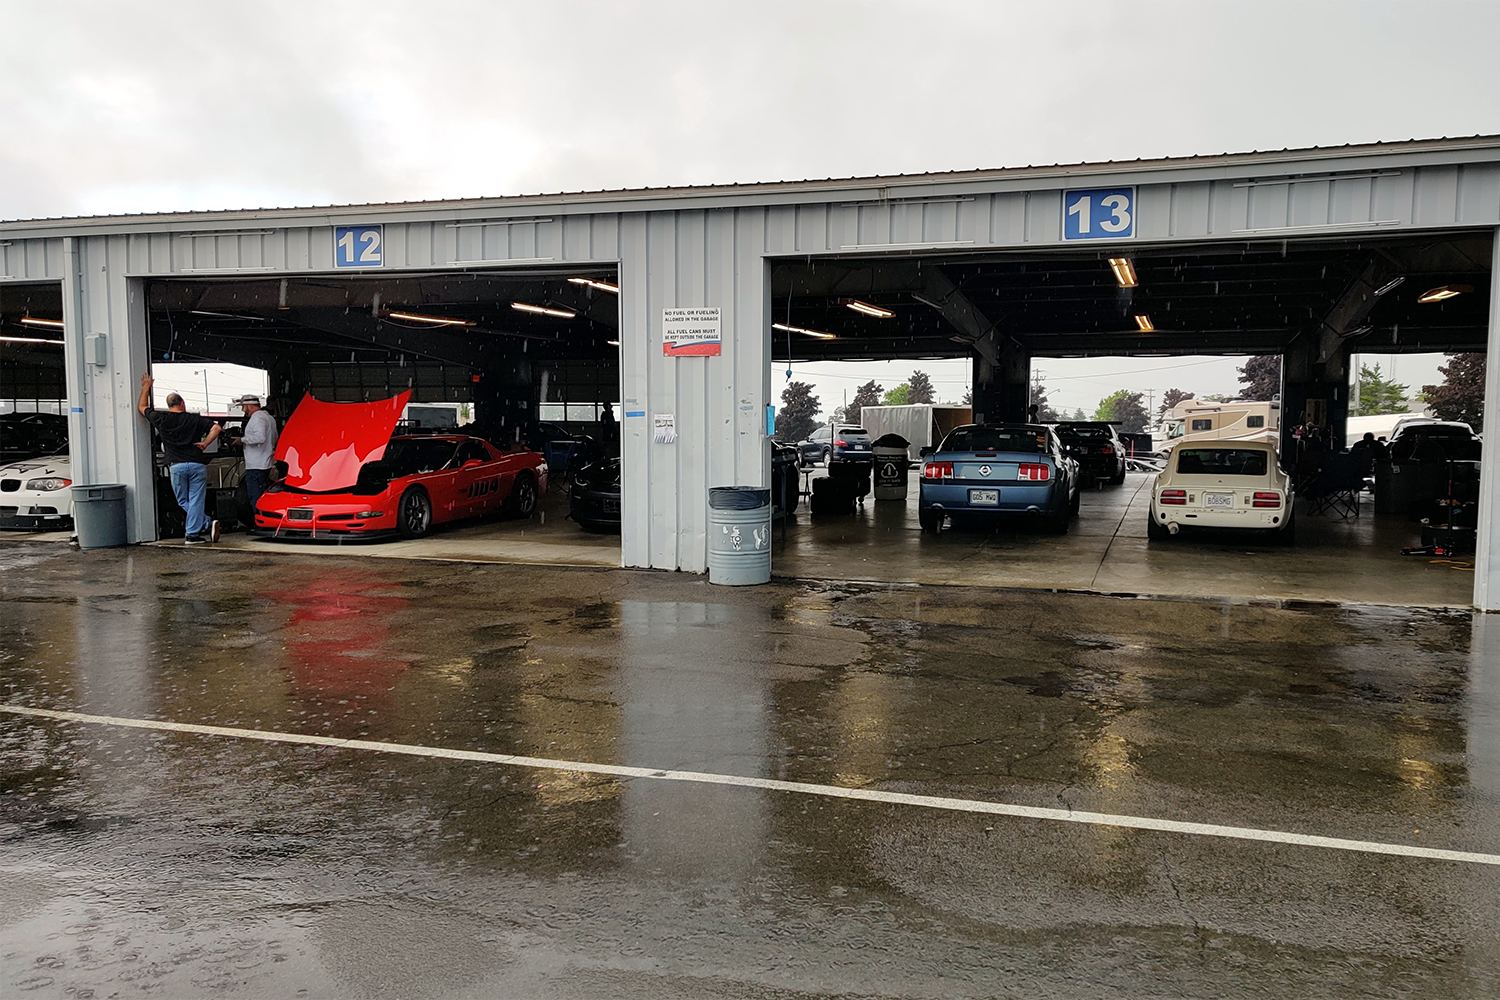 Pouring rain at Watkins Glen racetrack keeps drivers and their cars under shelter for a period of time